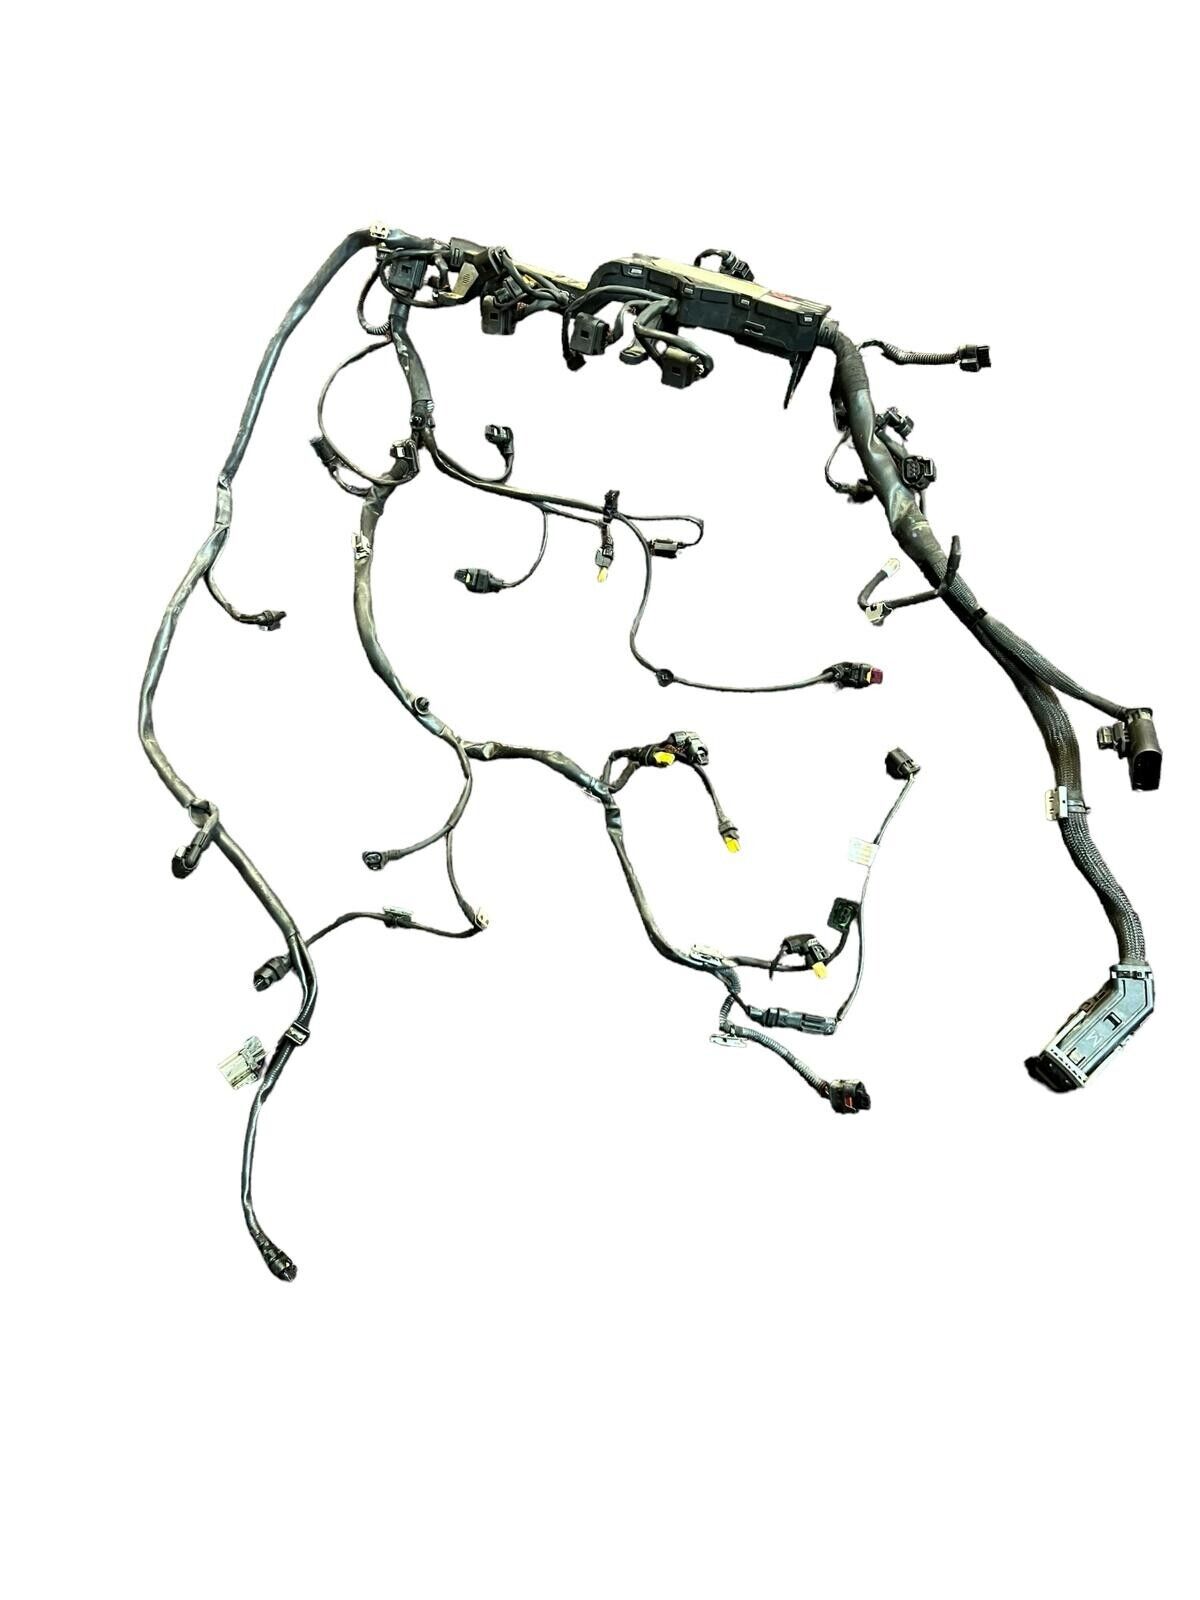 2014-2018 MERCEDES CLA250 FWD ENGINE BAY WIRE HARNESS ASSEMBLY OEM